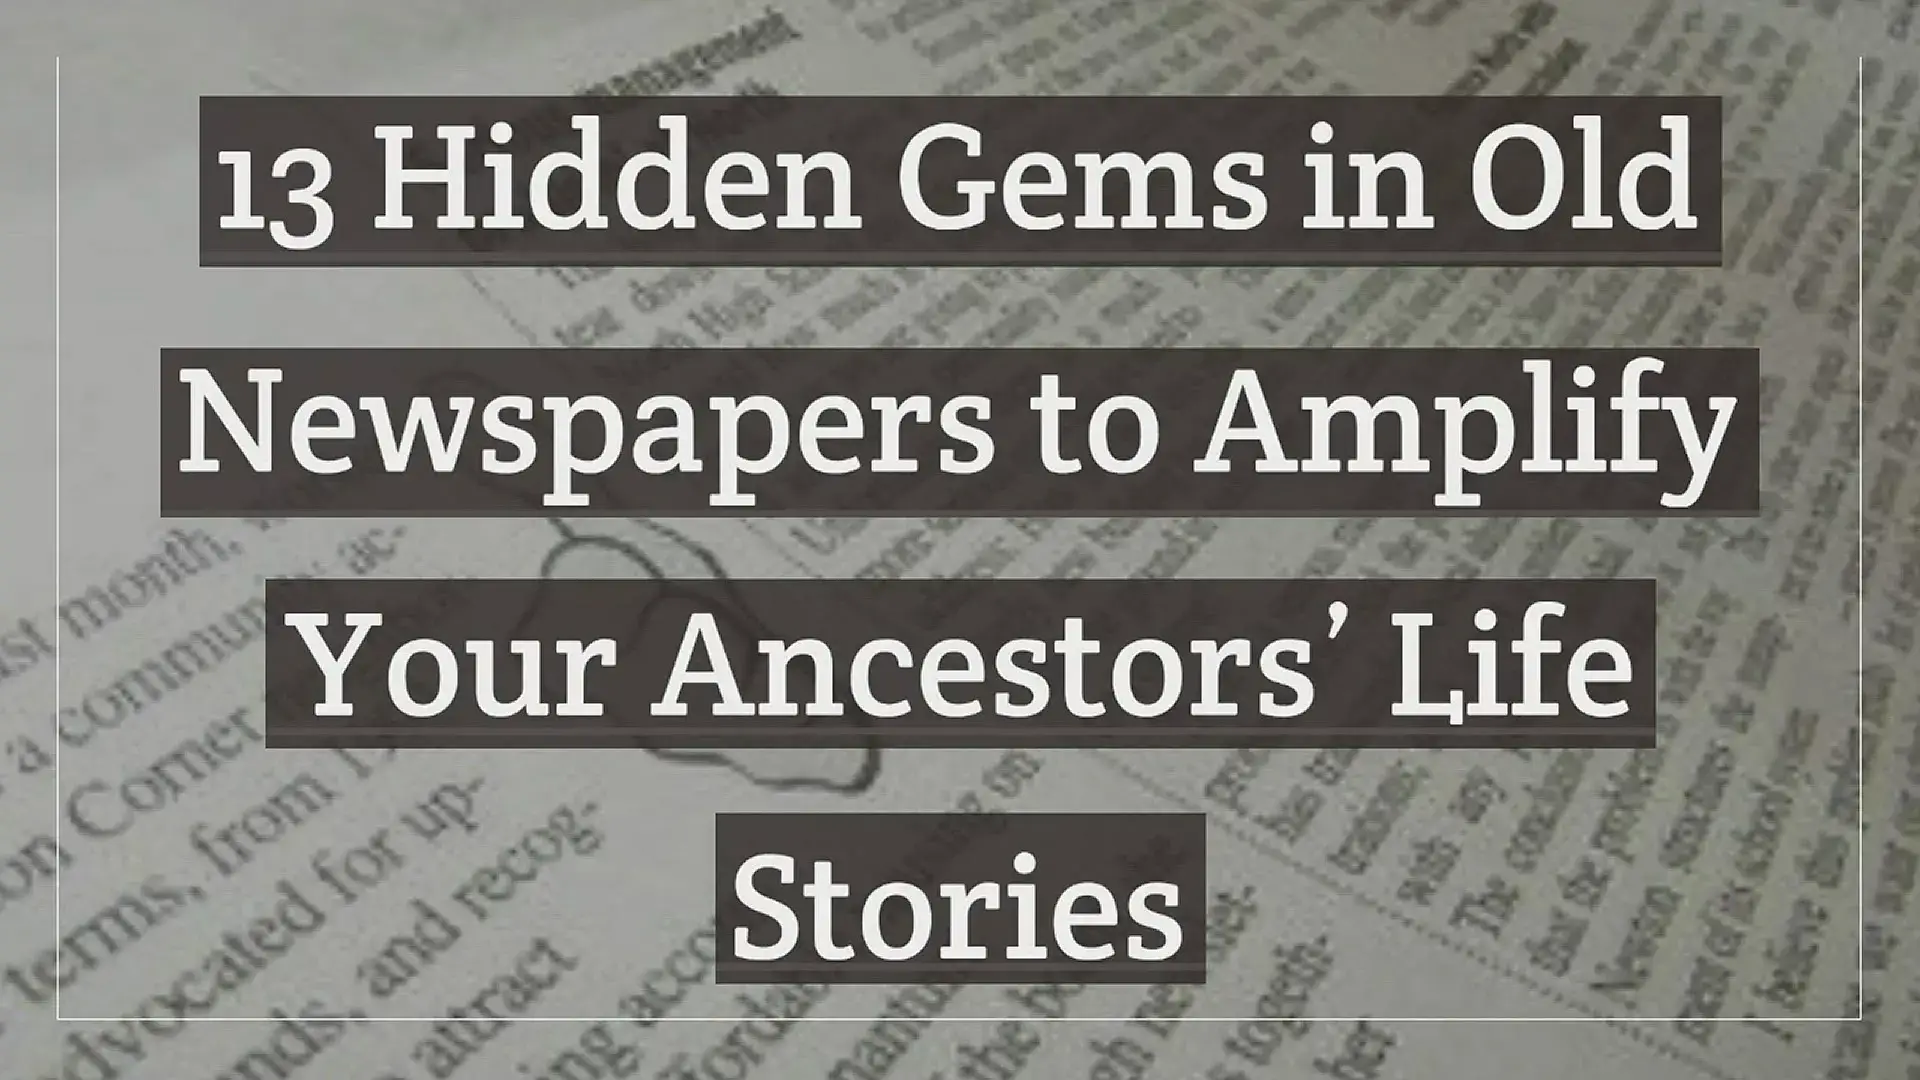 'Video thumbnail for 13 Hidden Gems in Old Newspapers to Amplify Your Ancestors’ Life Stories'